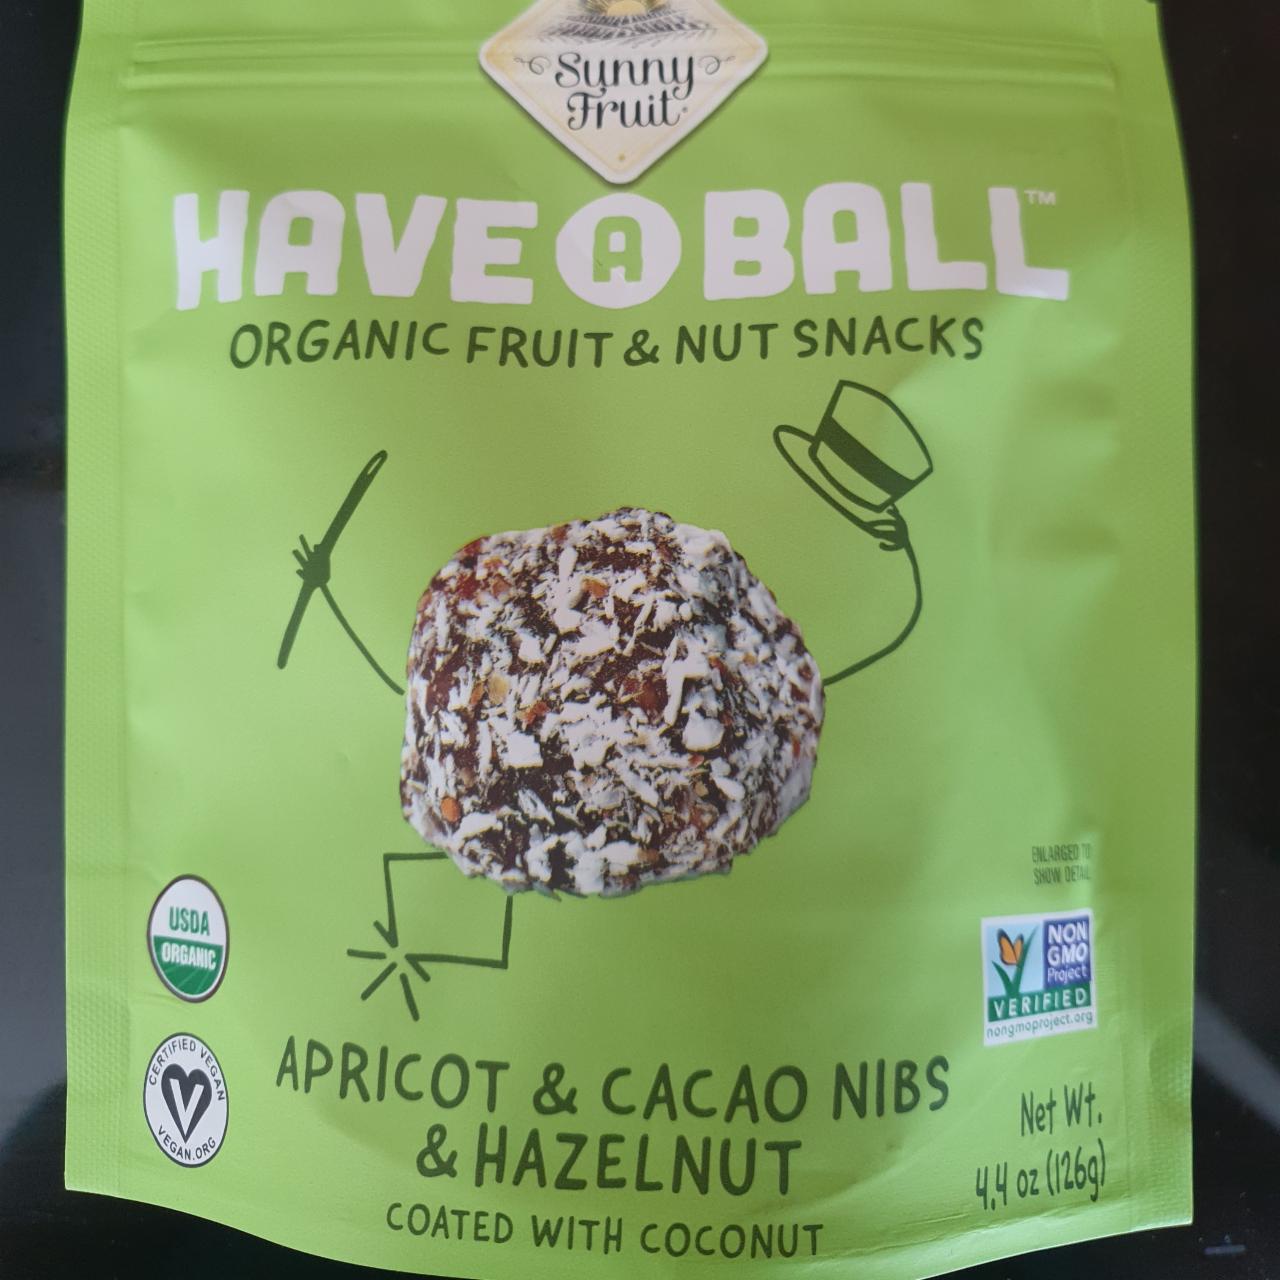 Fotografie - Have a Ball organic fruit & nut snacks Apricot & Cacao nibs & Hazelnut coated with coconut Sunny Fruit